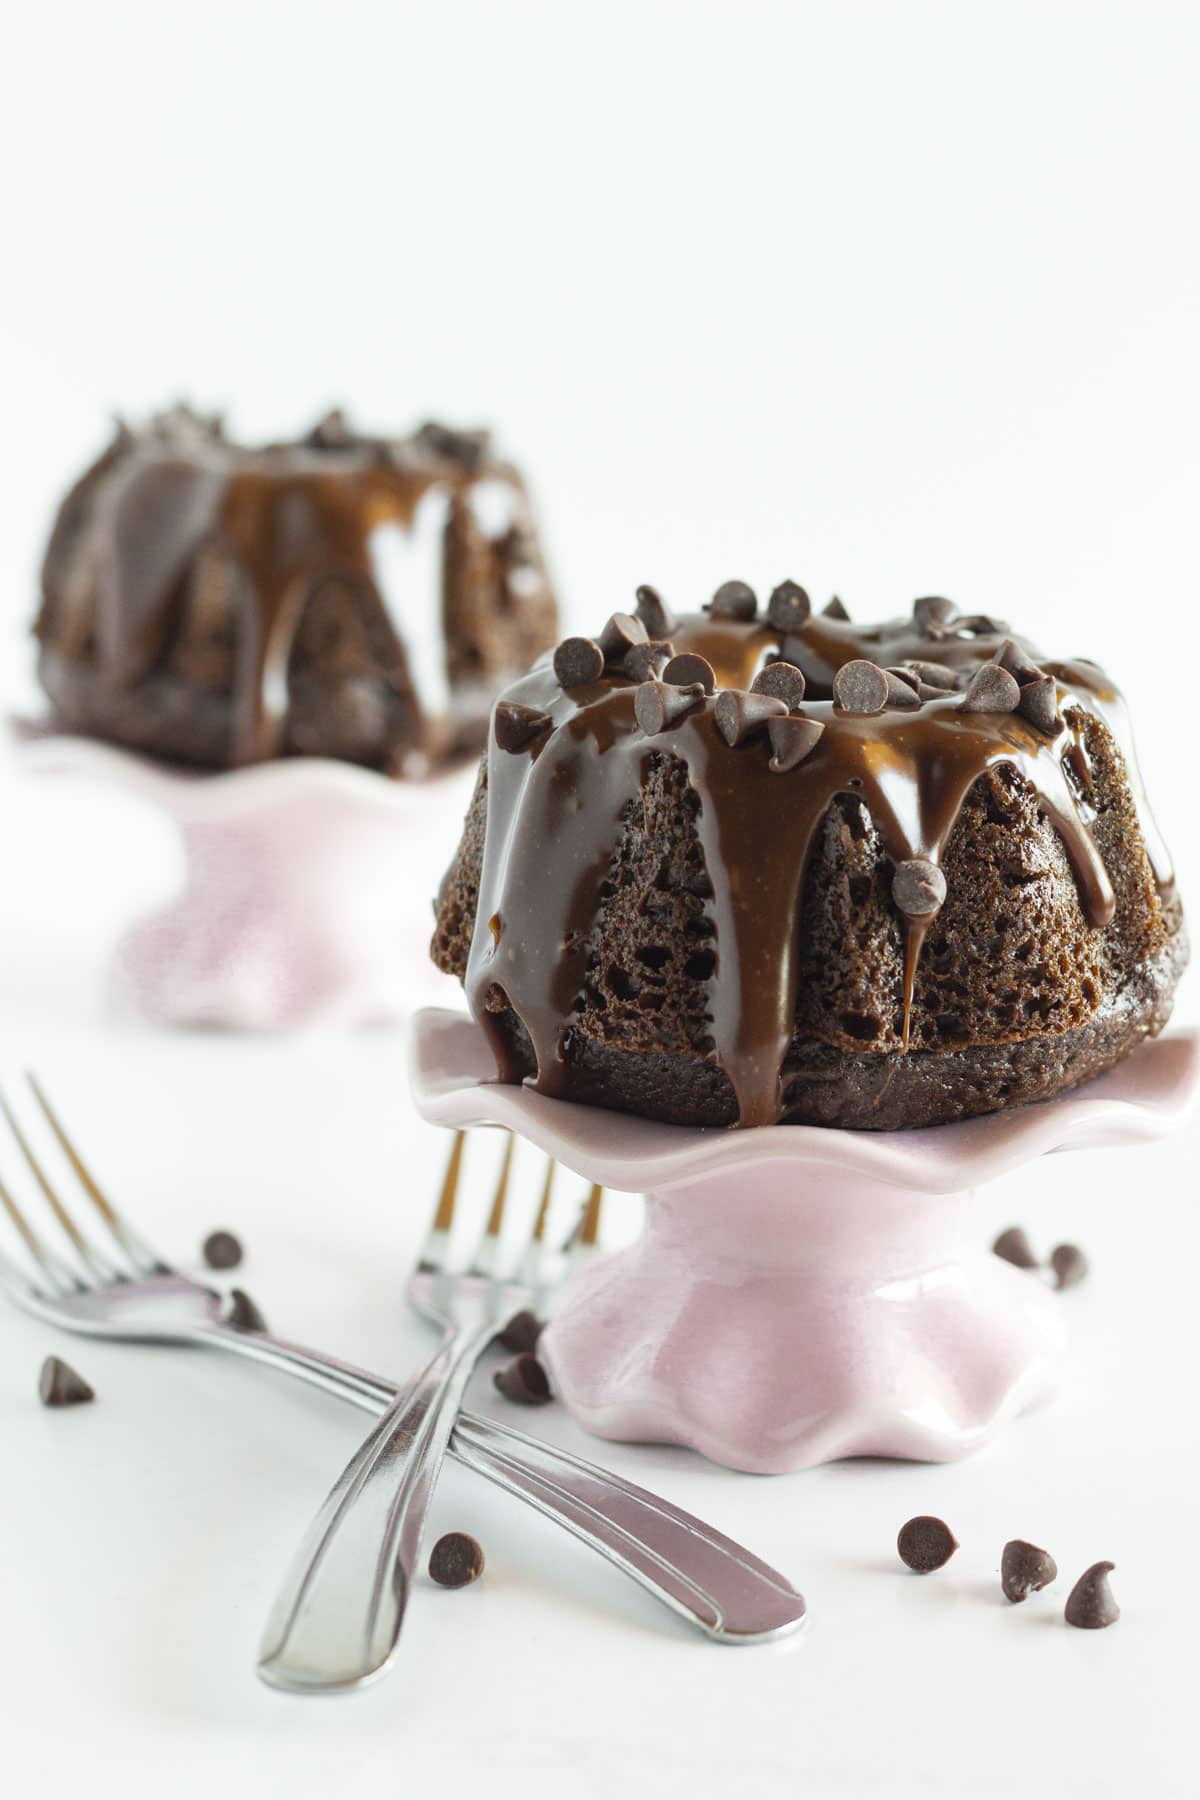 Chocolate Bourbon Mini Bundt Cakes - How To Make These - My Humble Home and  Garden